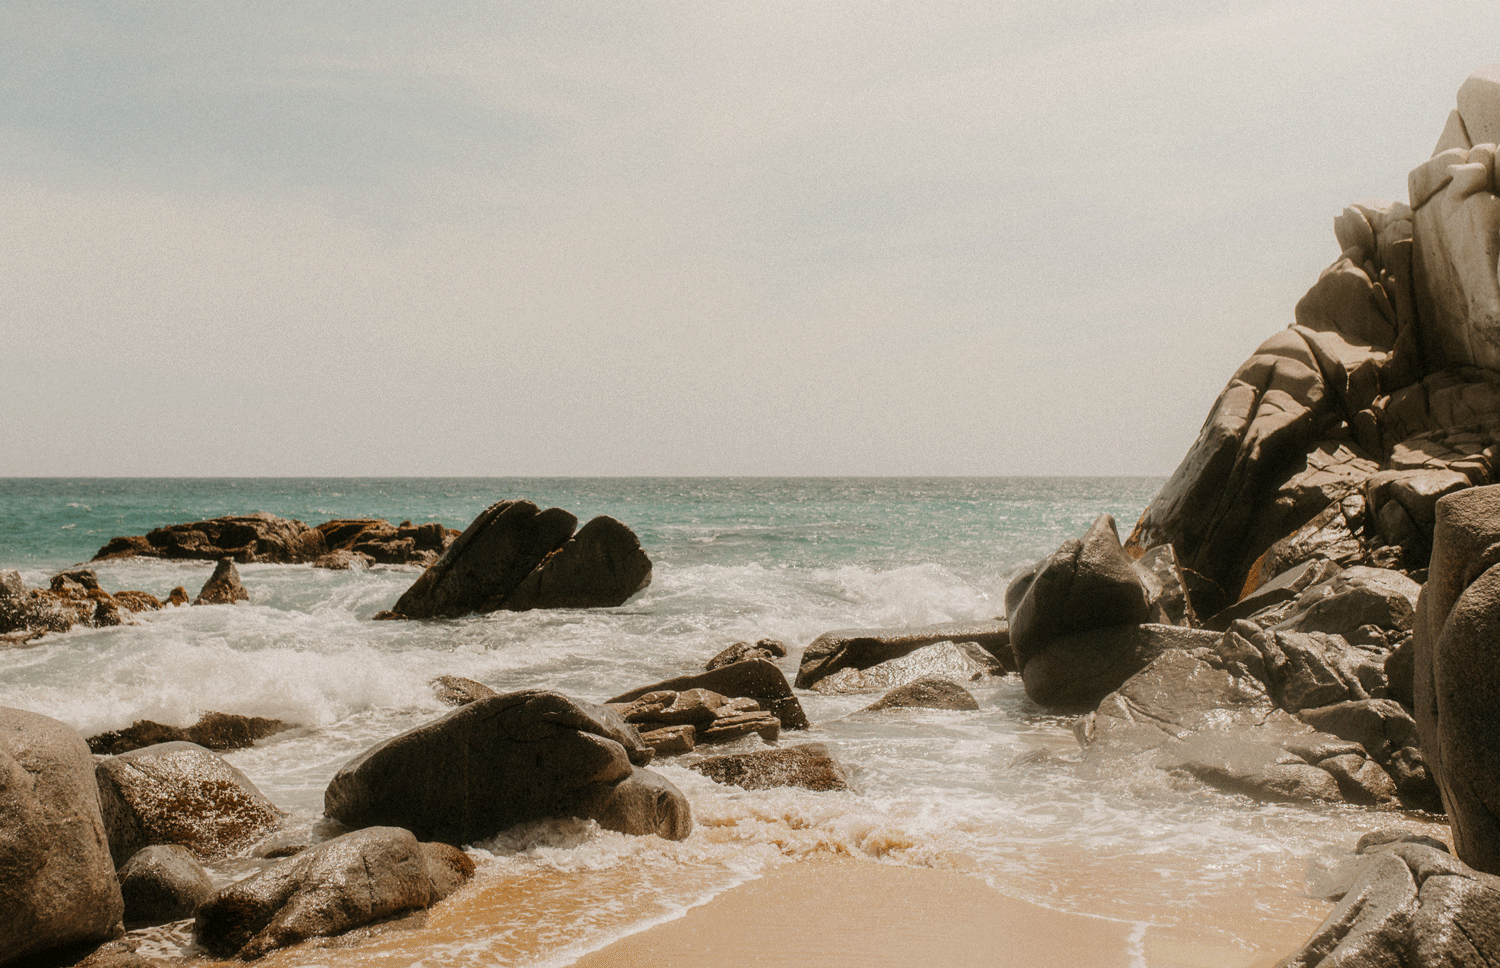 Waves crashing on the rocks in Cabo San Lucas, Mexico